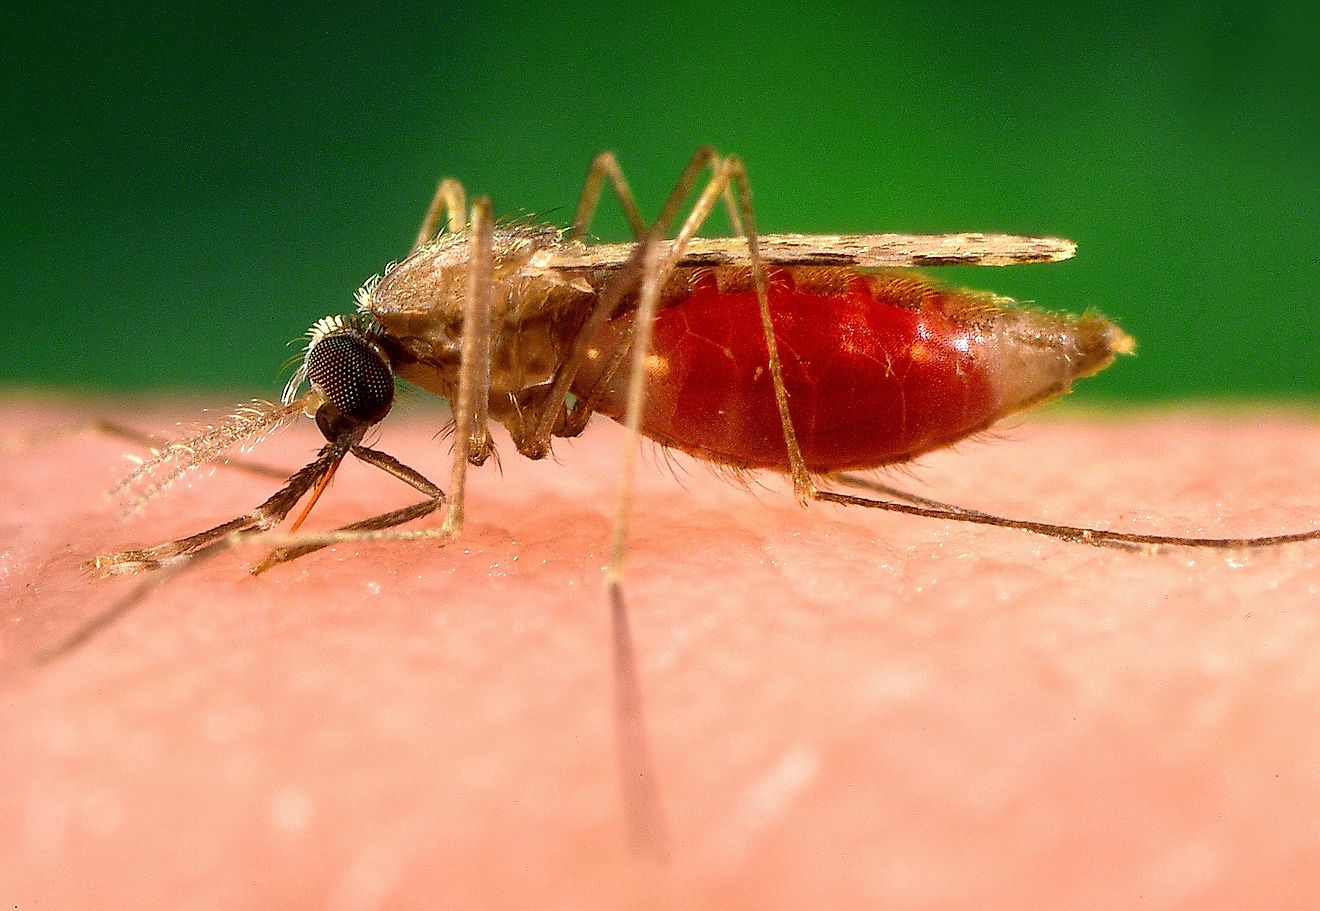 Malaria is one of the most deadly diseases spread by the mosquito.